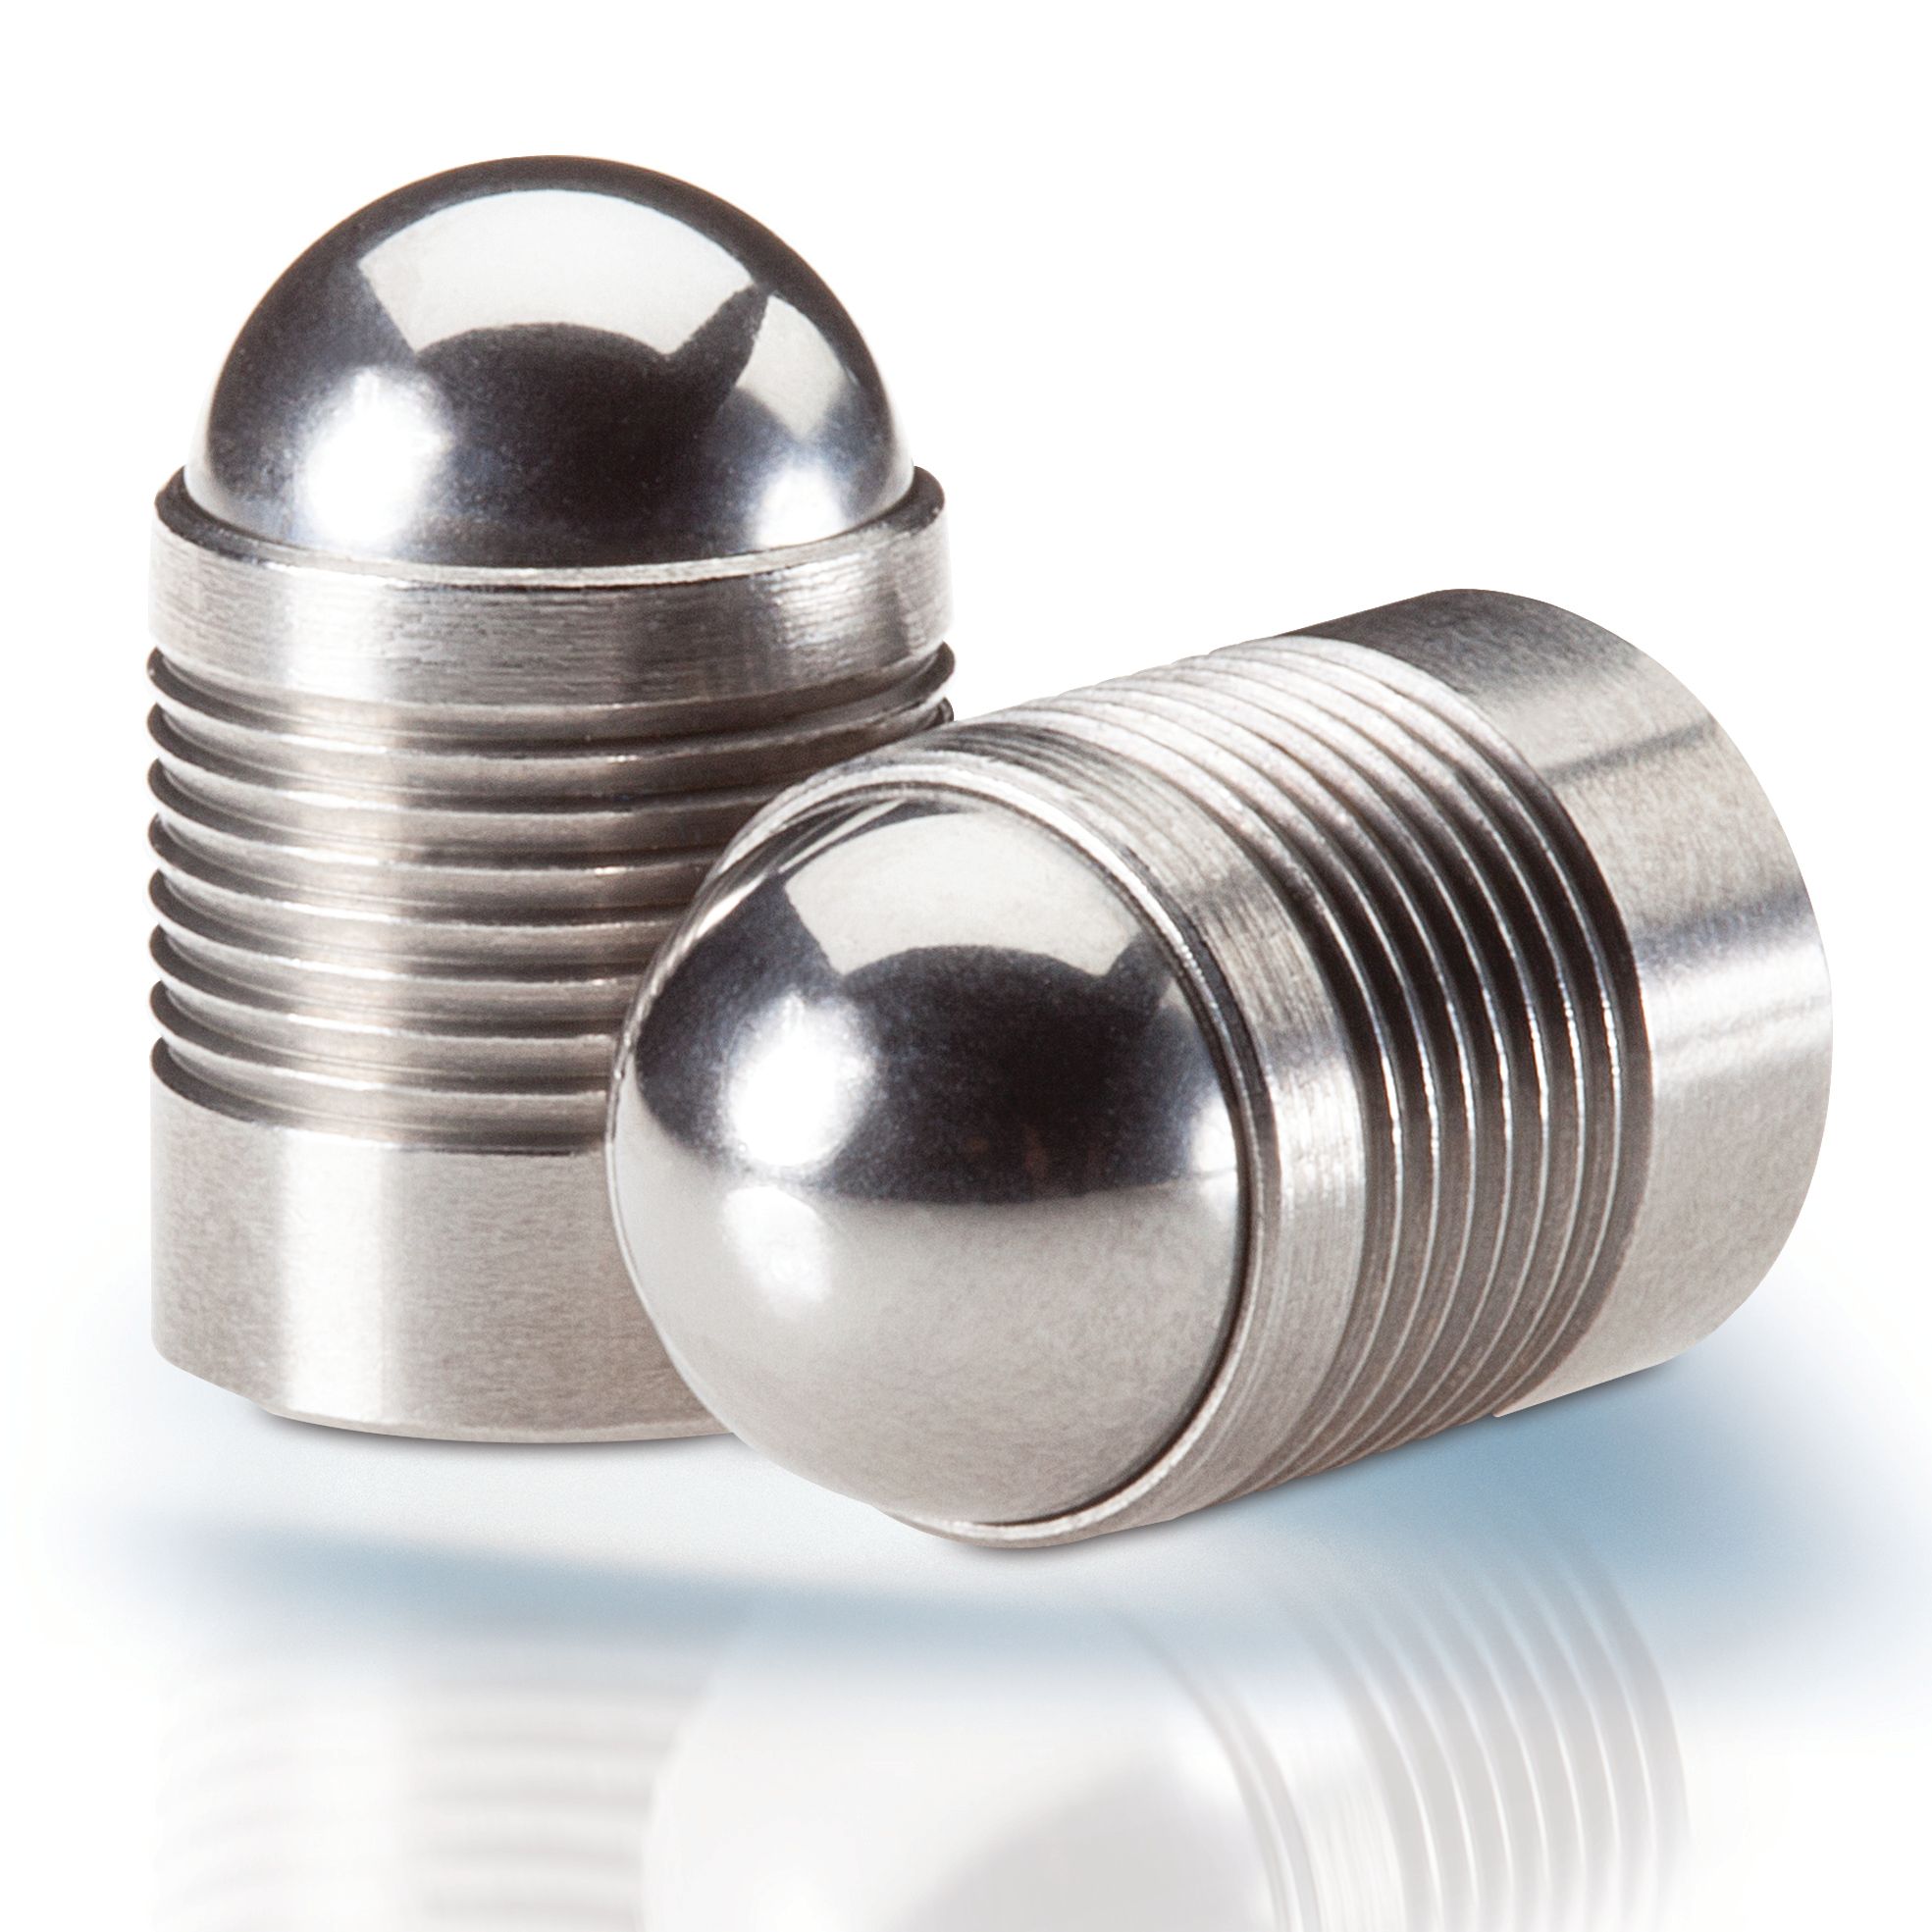 Mechanical metal-to-metal sealing plugs reduce operational cost and waste